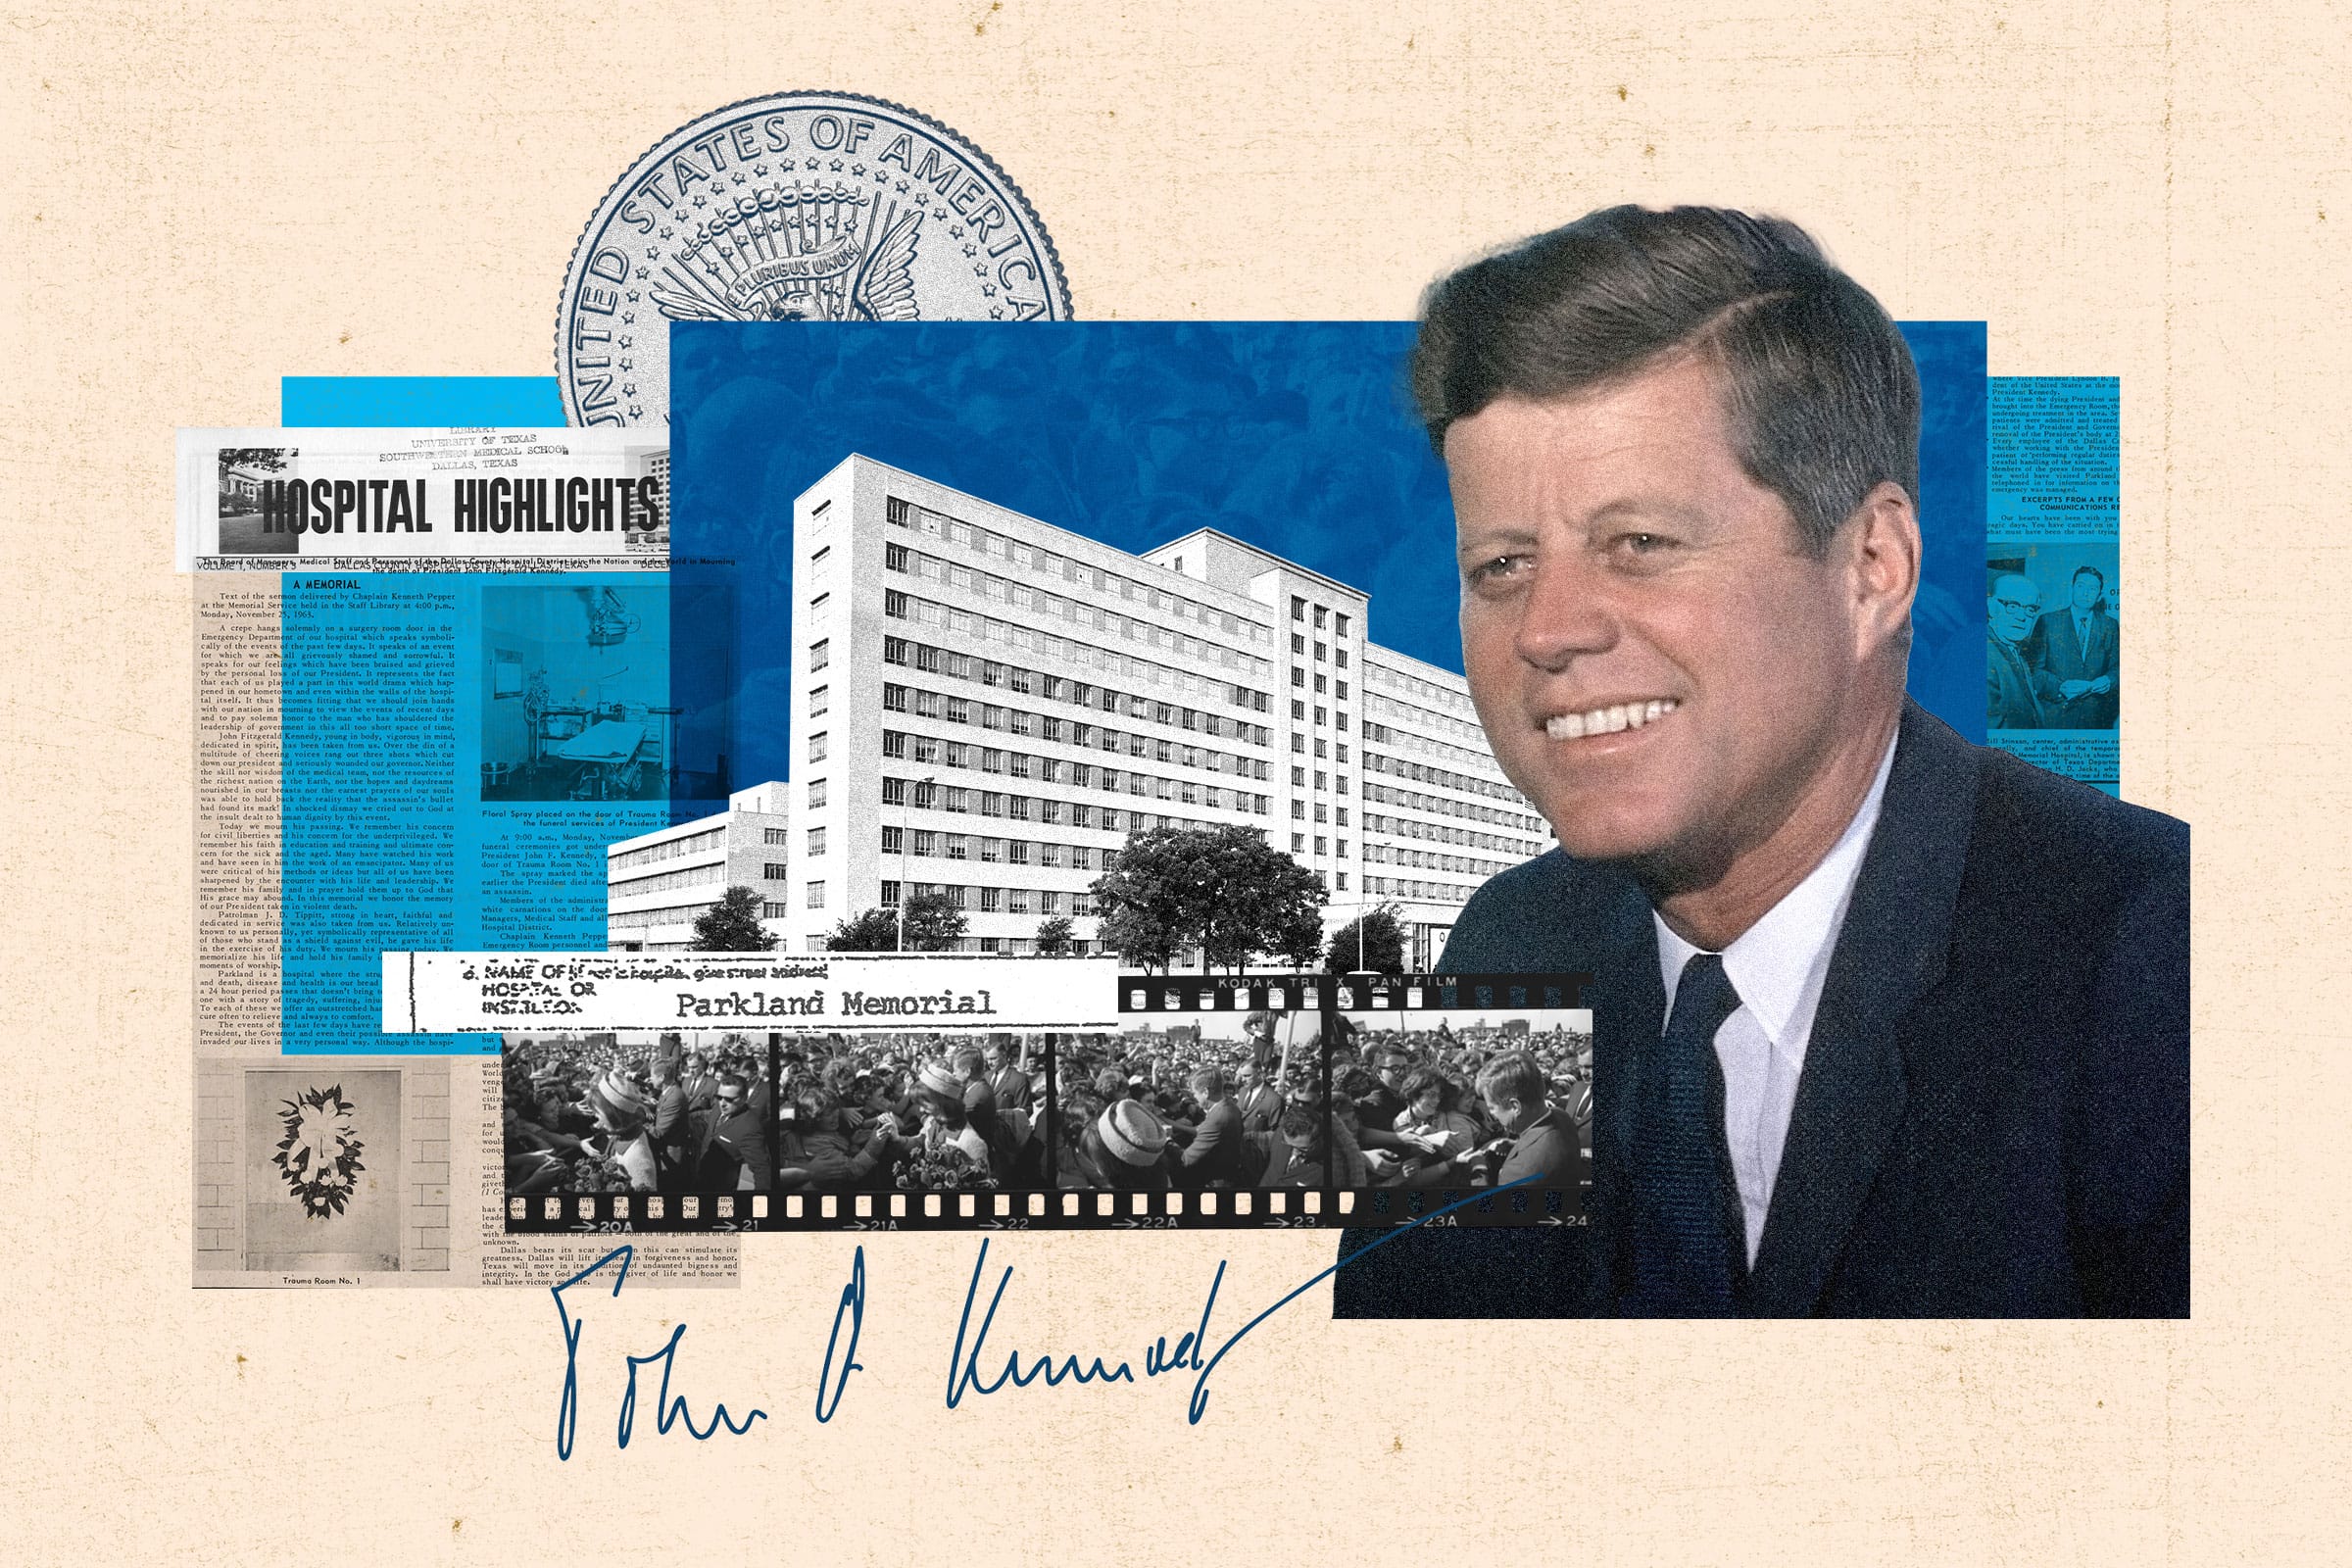 A portrait of John F. Kennedy wearing a suit and smiling surrounded by a collage of images from the aftermath of the assassination, including a photo of Parkland Memorial Hospital, news clippings, a video filmstrip, an excerpt from the death certificate, the reverse side of a Kennedy half dollar, and the President's signature.